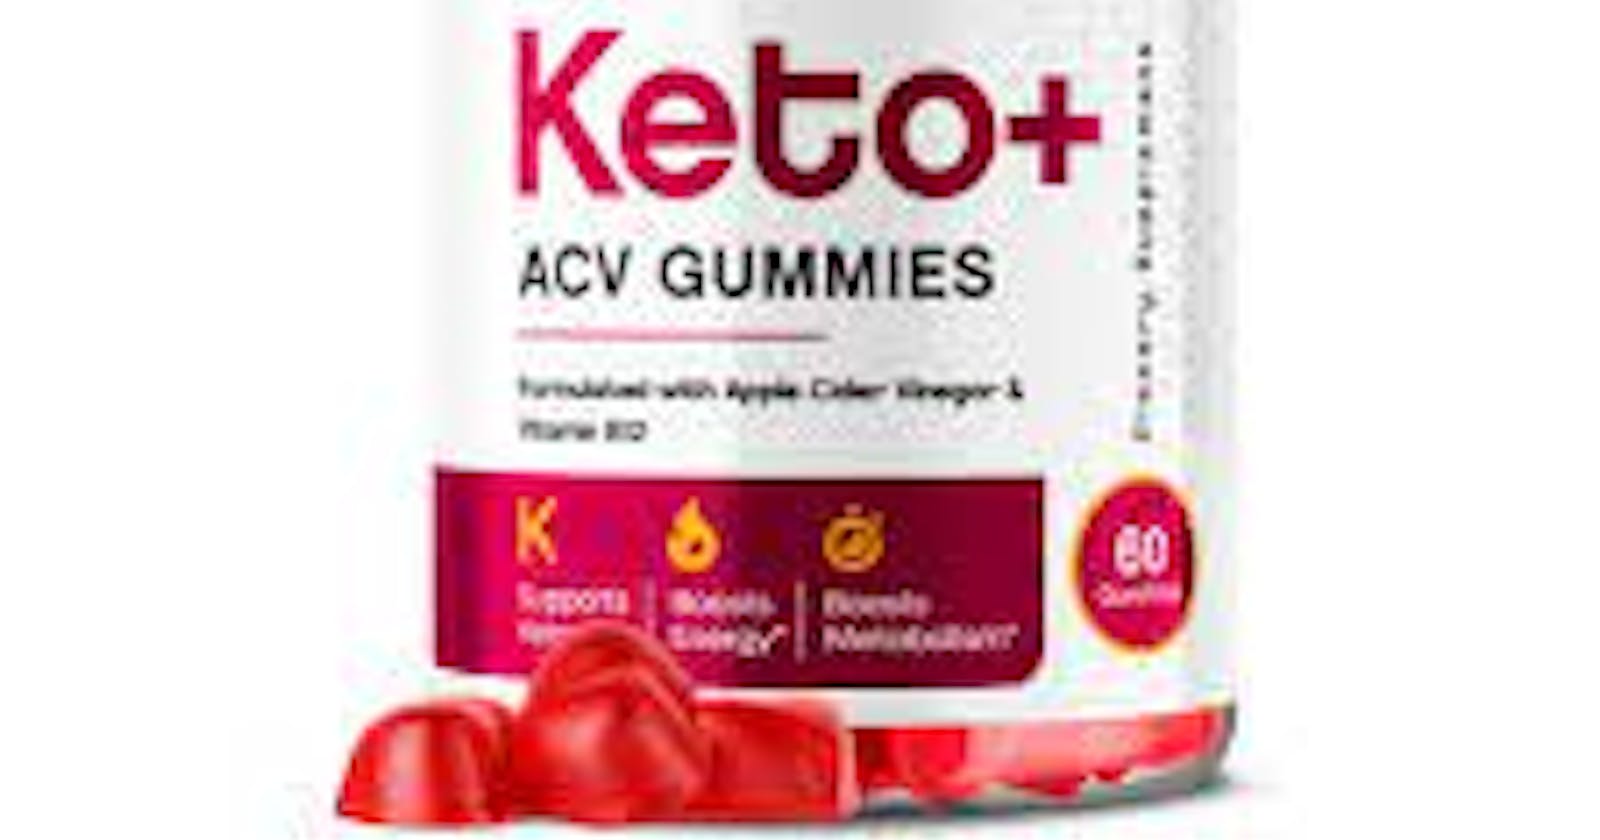 x10 boost keto acv gummies 2024: (Fake or Legit) What Customers Have To Say?